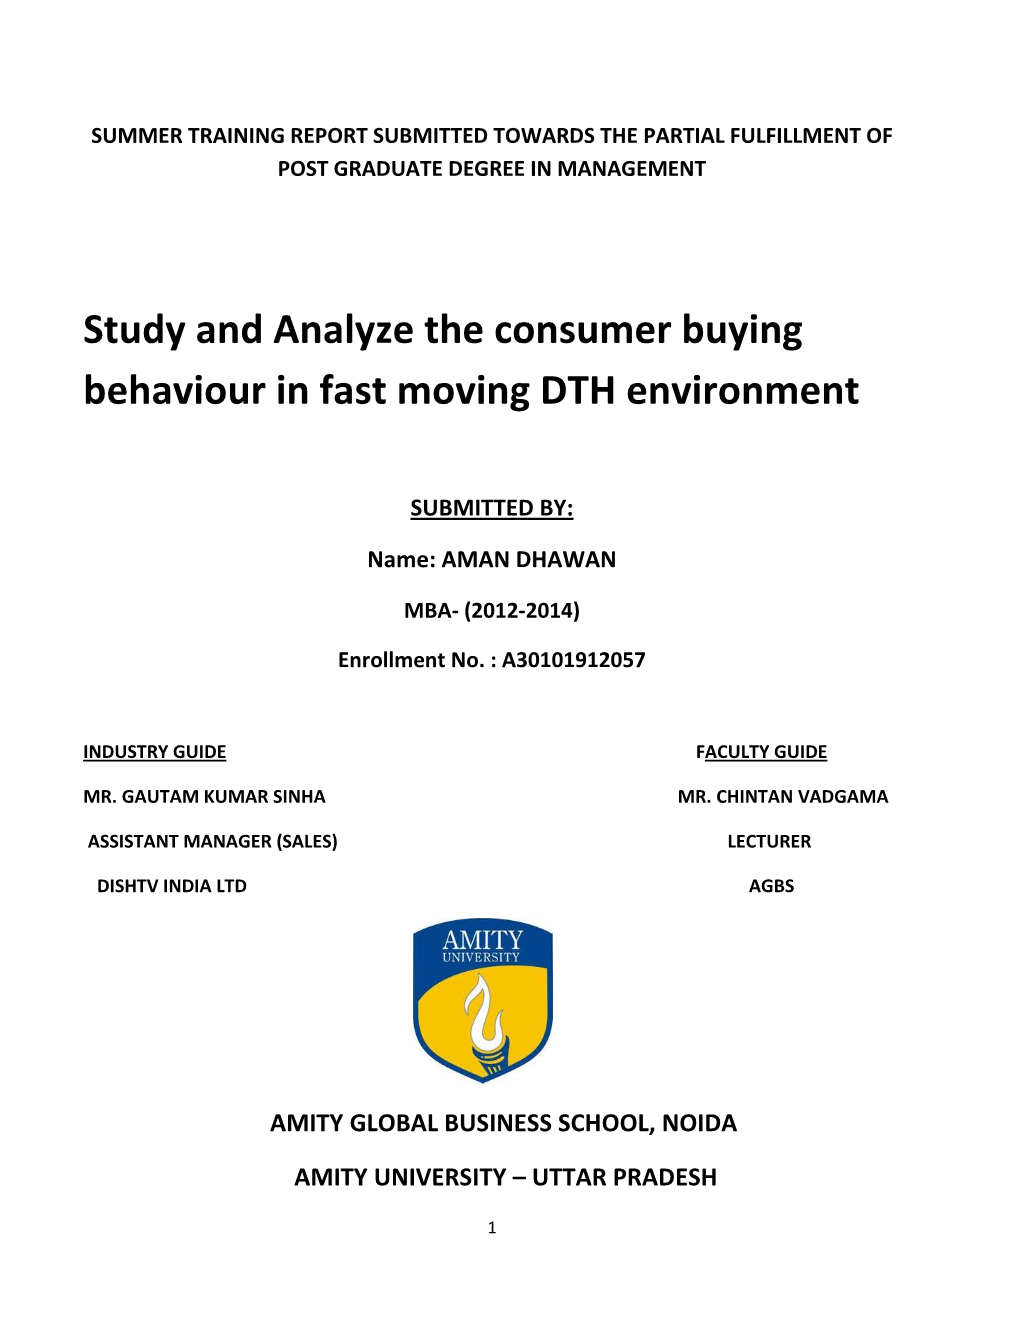 Study and Analyze the Consumer Buying Behaviour in Fast Moving DTH Environment